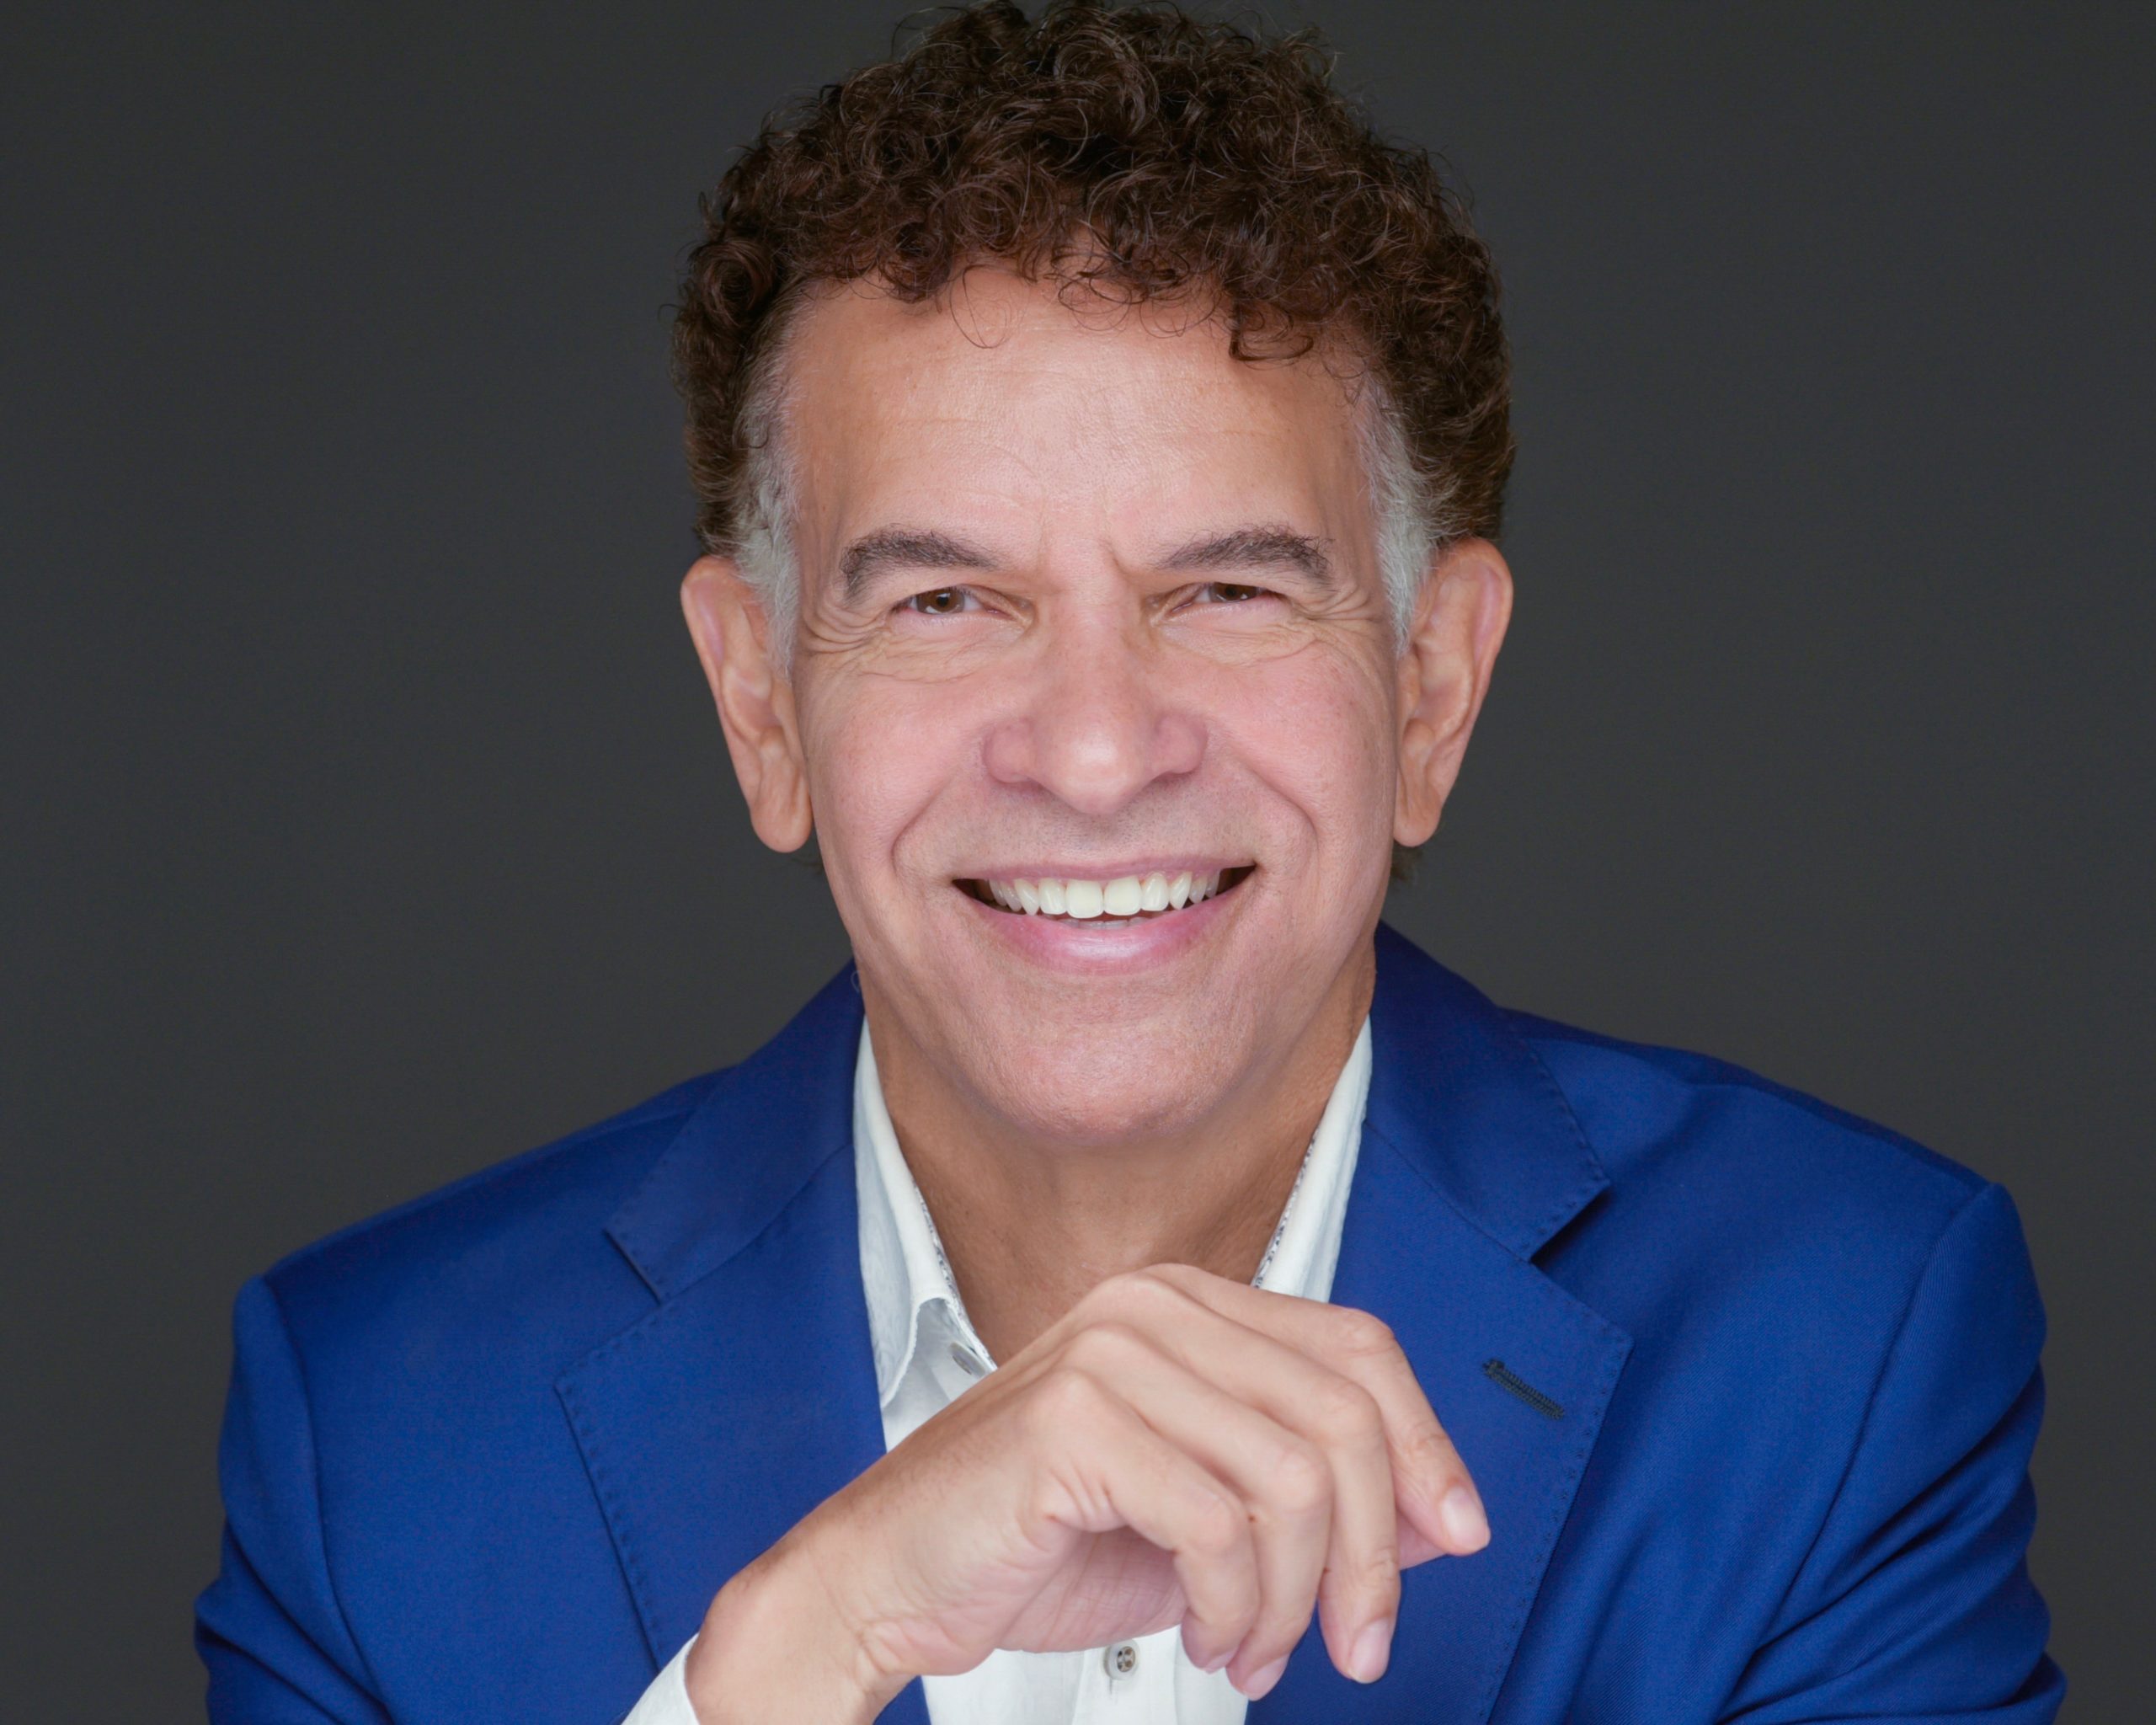 Brian Stokes Mitchell wearing a blue shirt and smiling at the camera